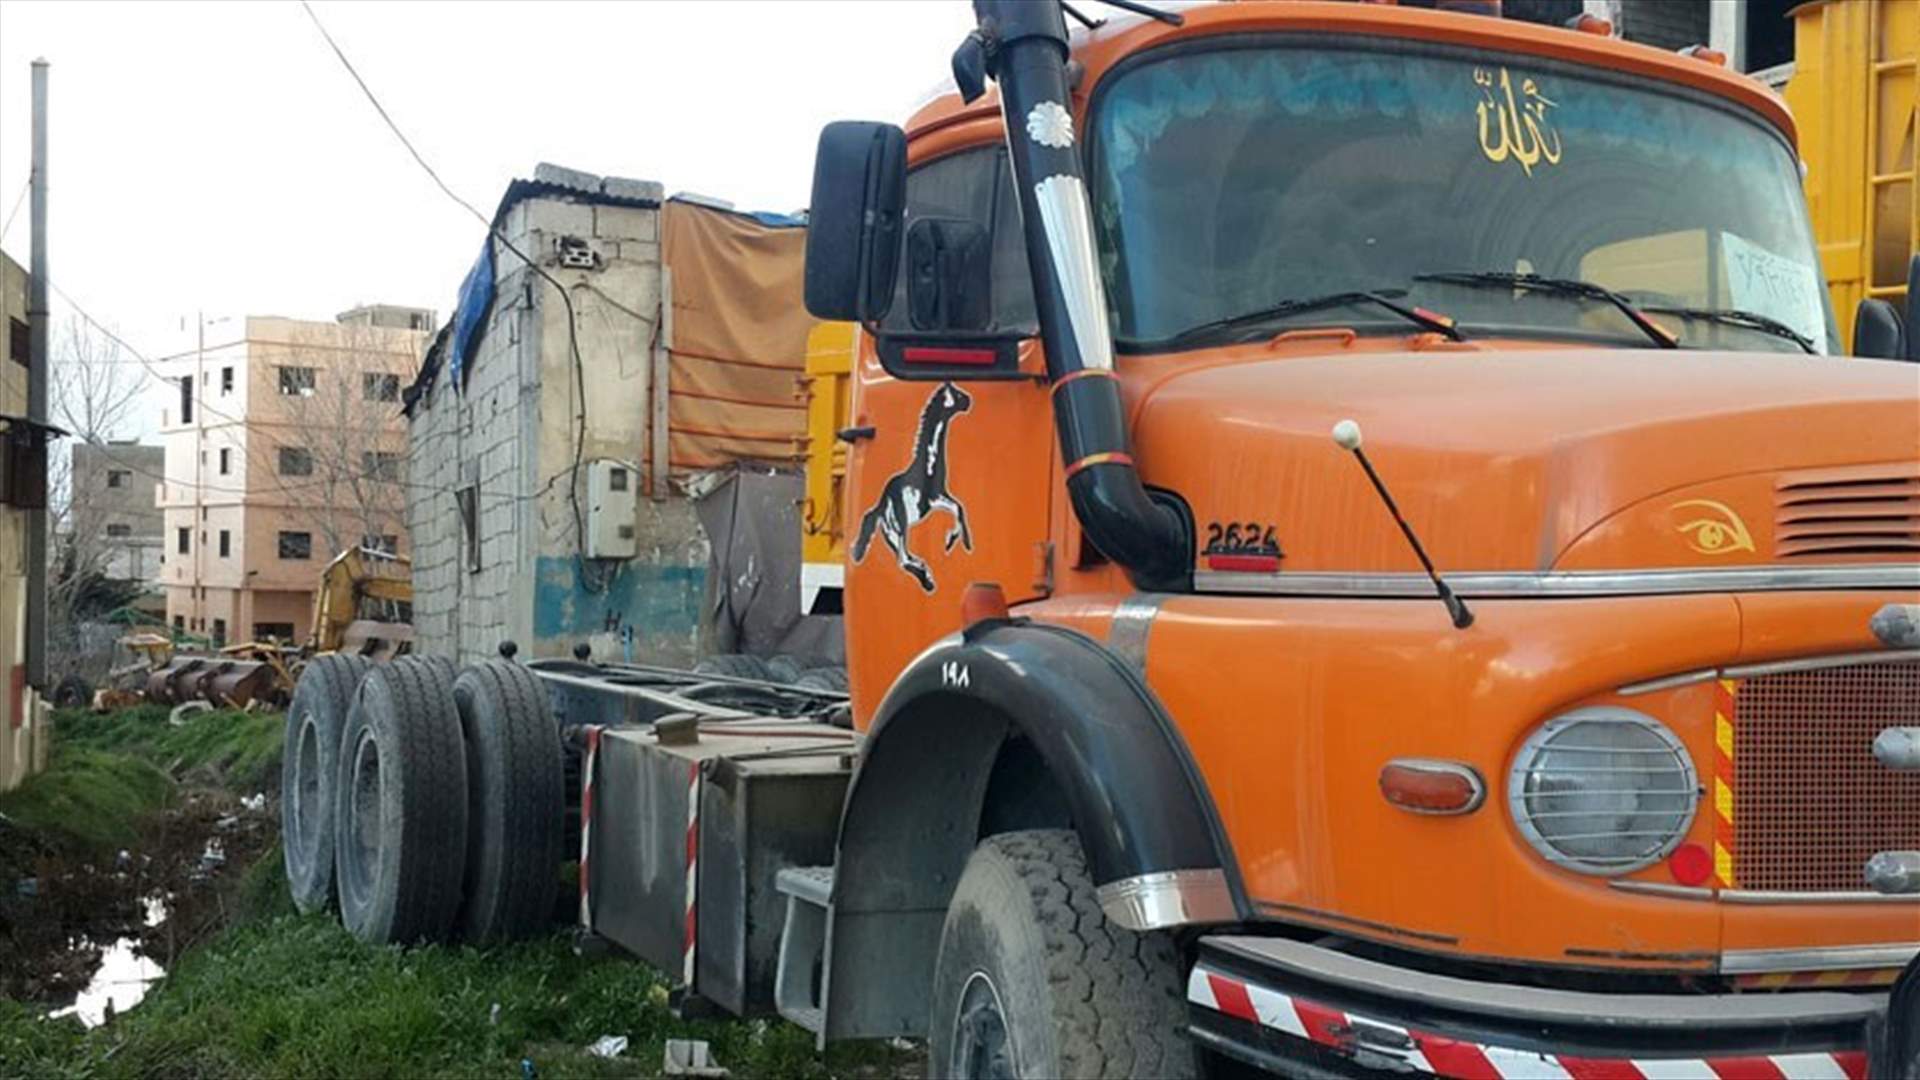 Worker killed after tire of a concrete mixer truck explodes in Kfartebnit